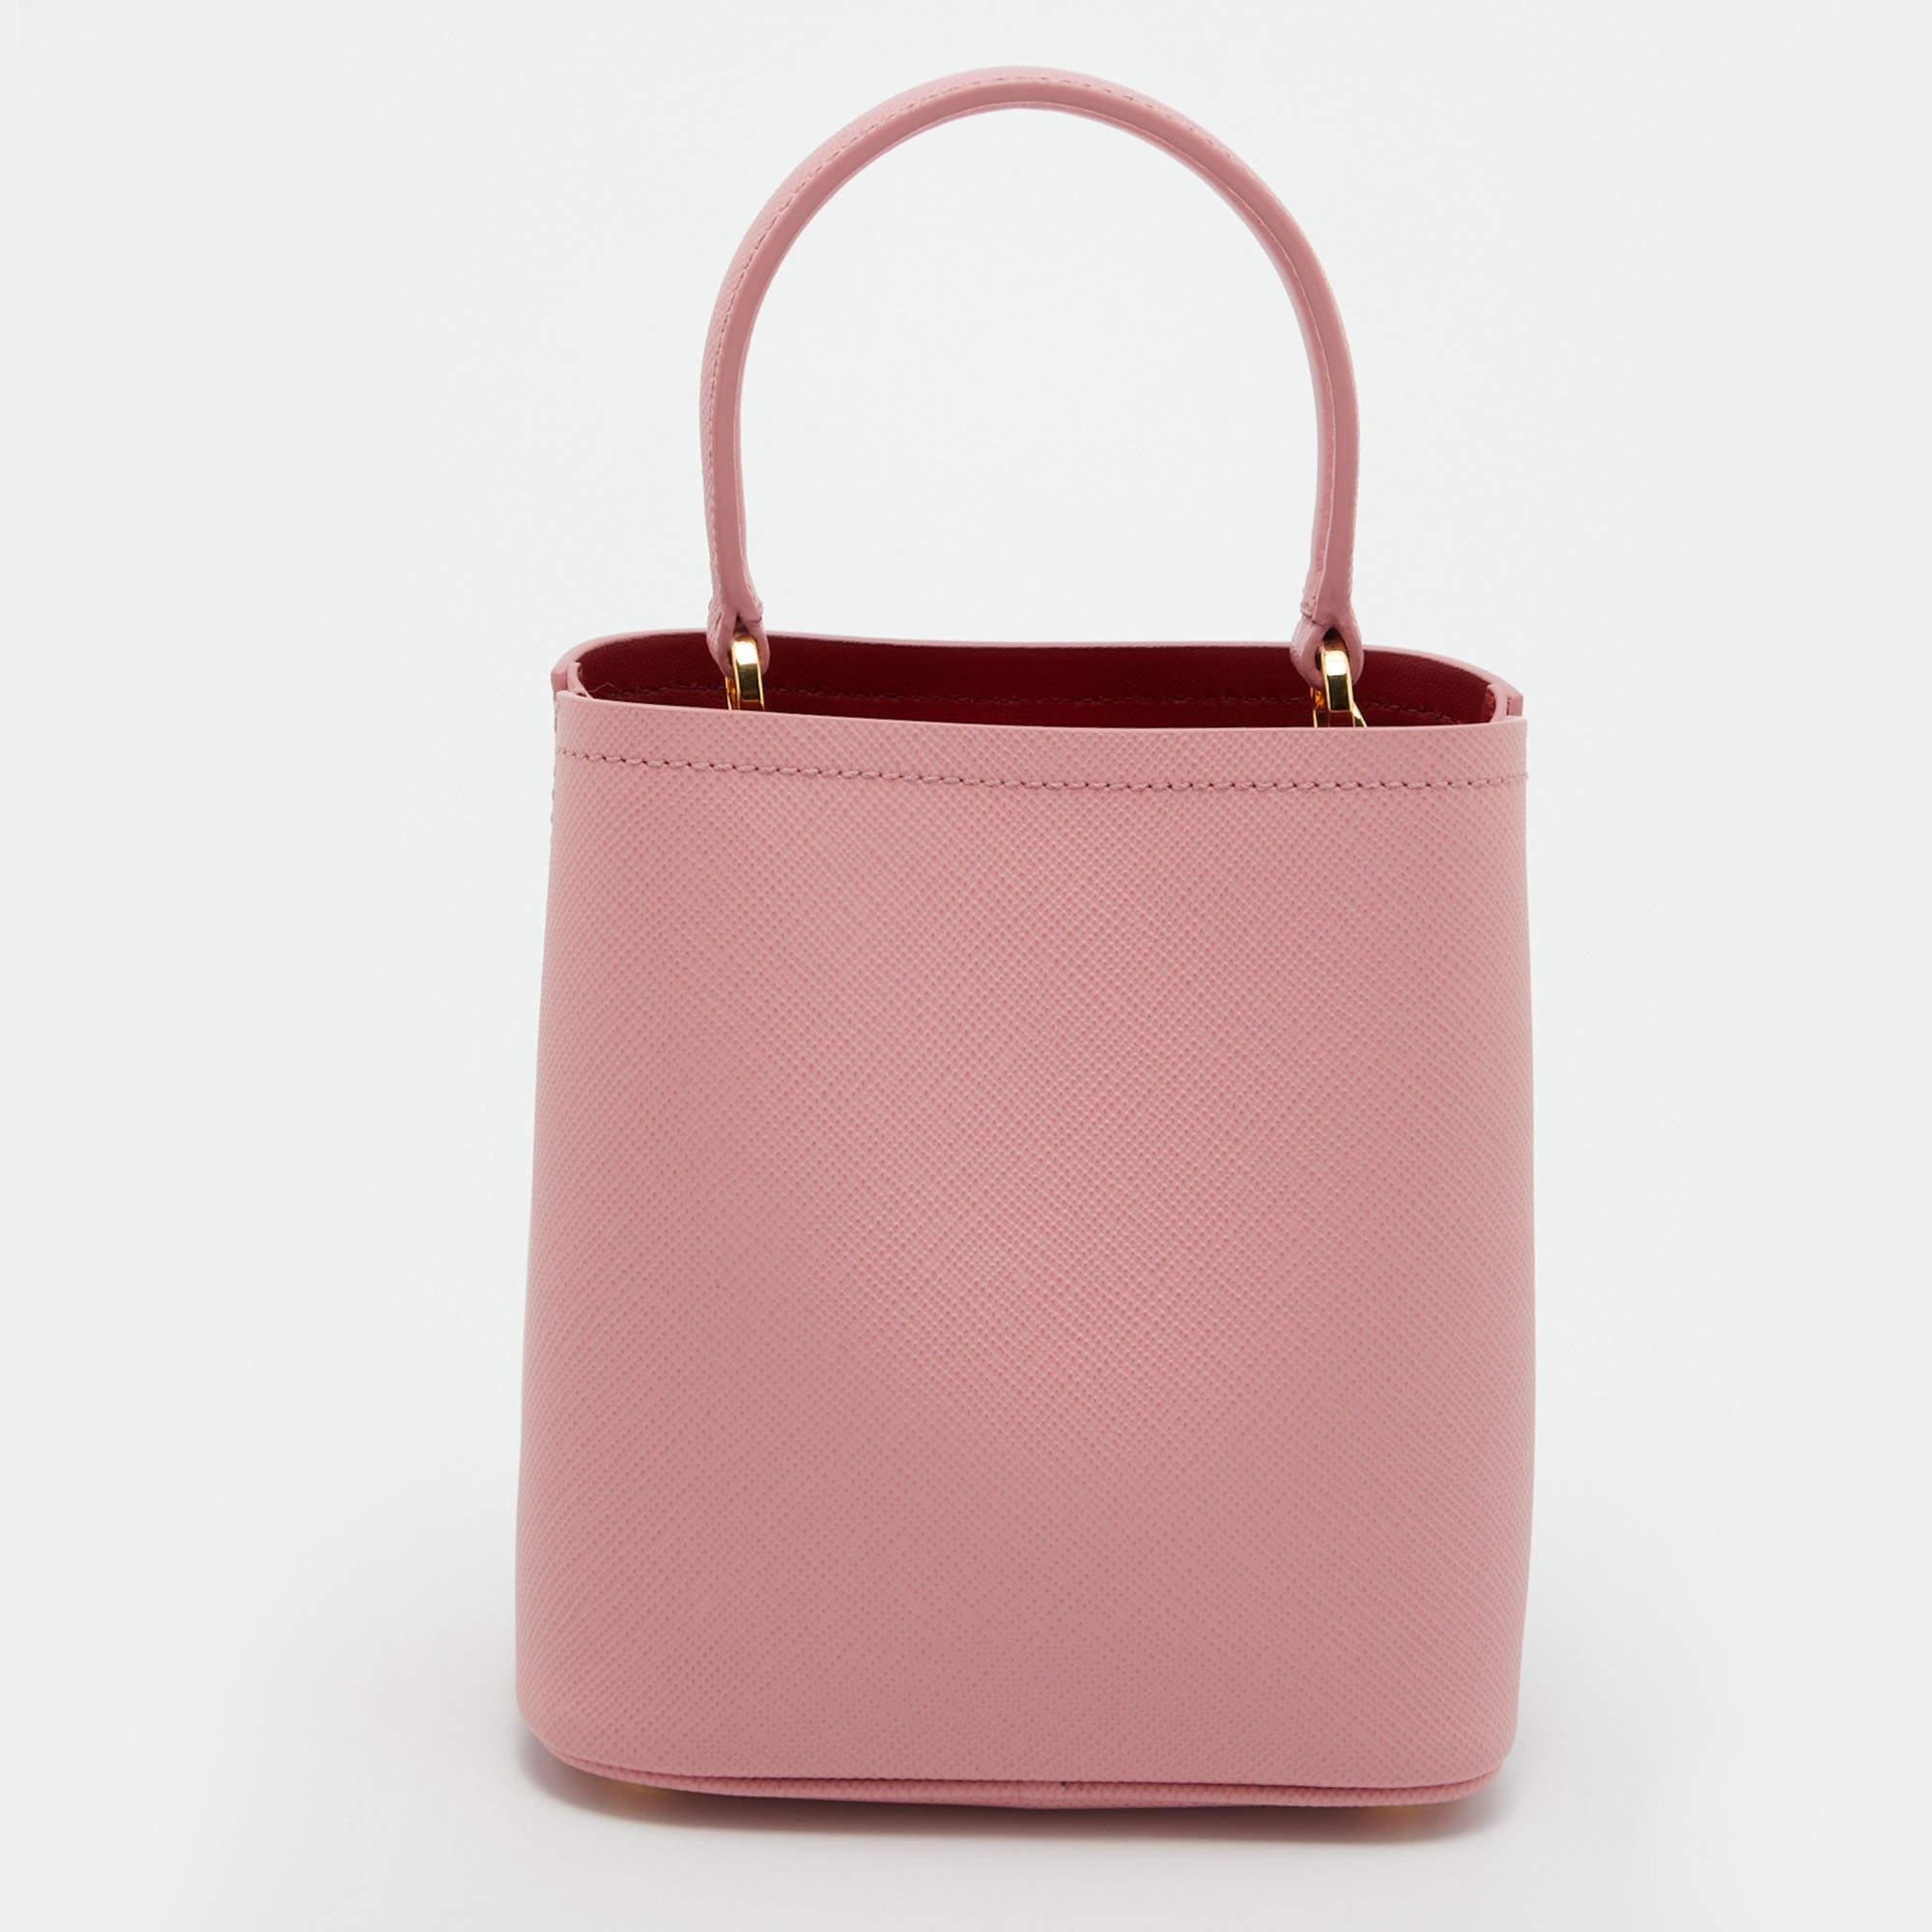 Prada's signature trait of luxury and class is displayed in this bag from the Panier collection. It is a top-handle leather bag that comes with a detachable strap and has the brand's logo fitted on the front in gold-tone metal. This pink-hued bag